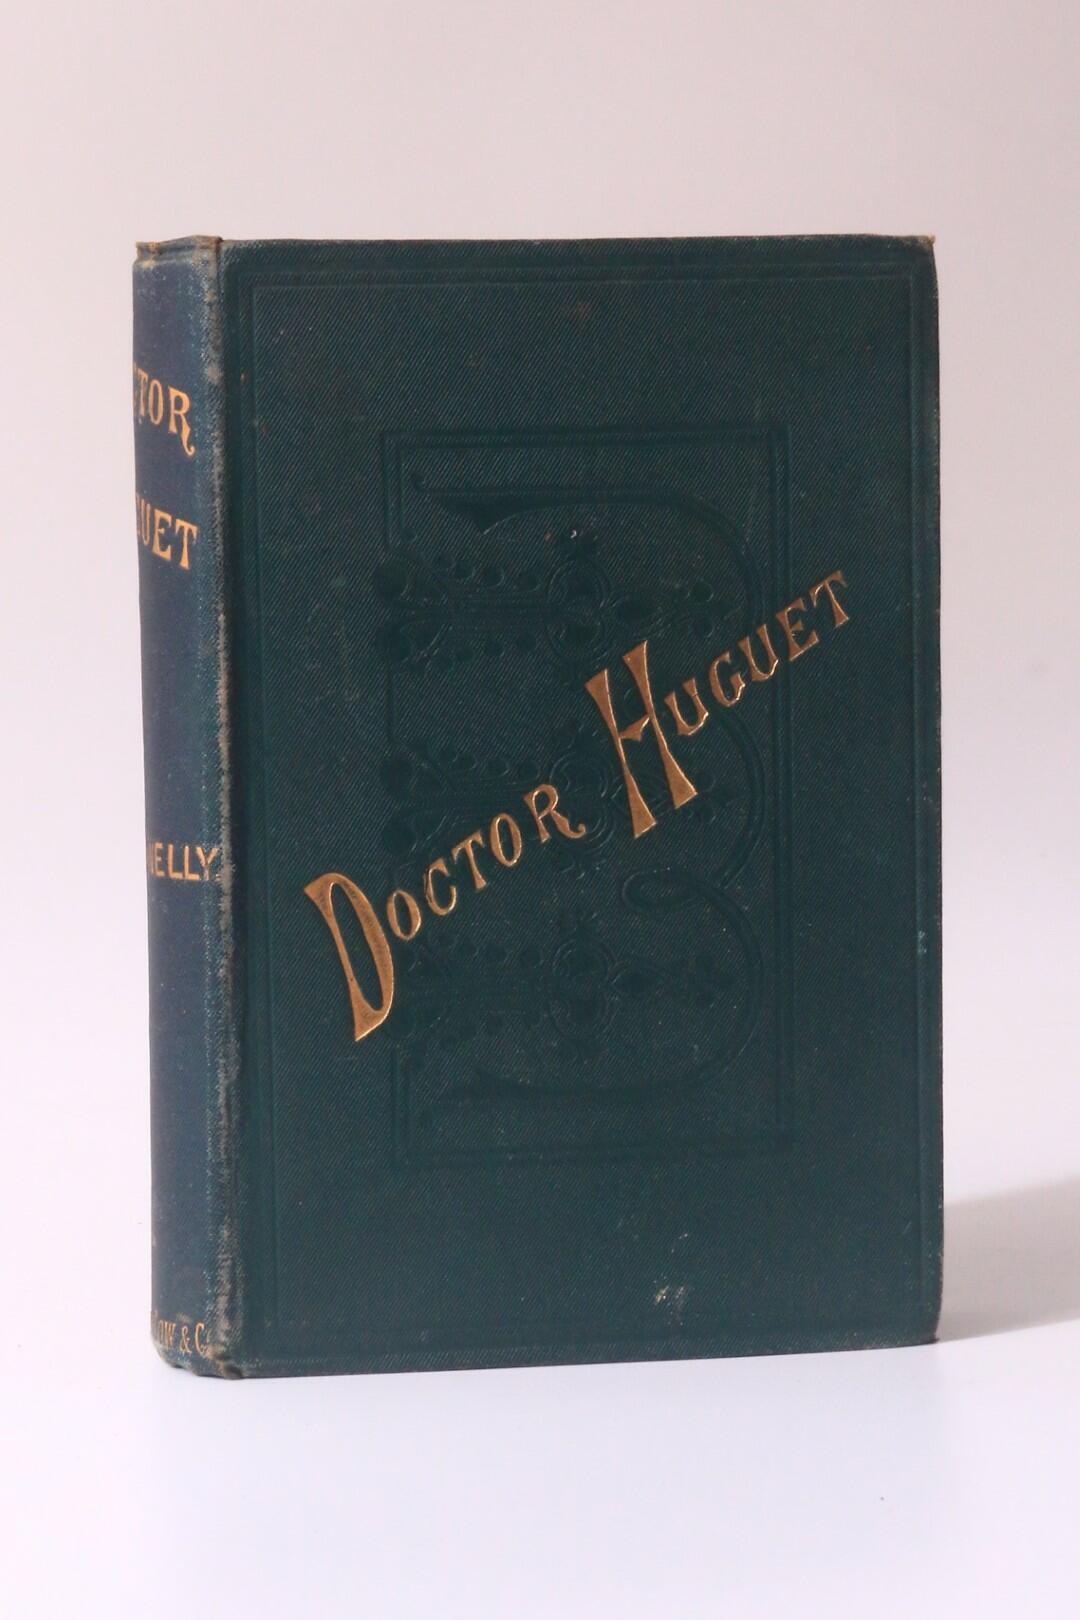 Ignatius Donnelly - Doctor Huguet - Sampson Low, Marston & Co., 1892, First Edition.